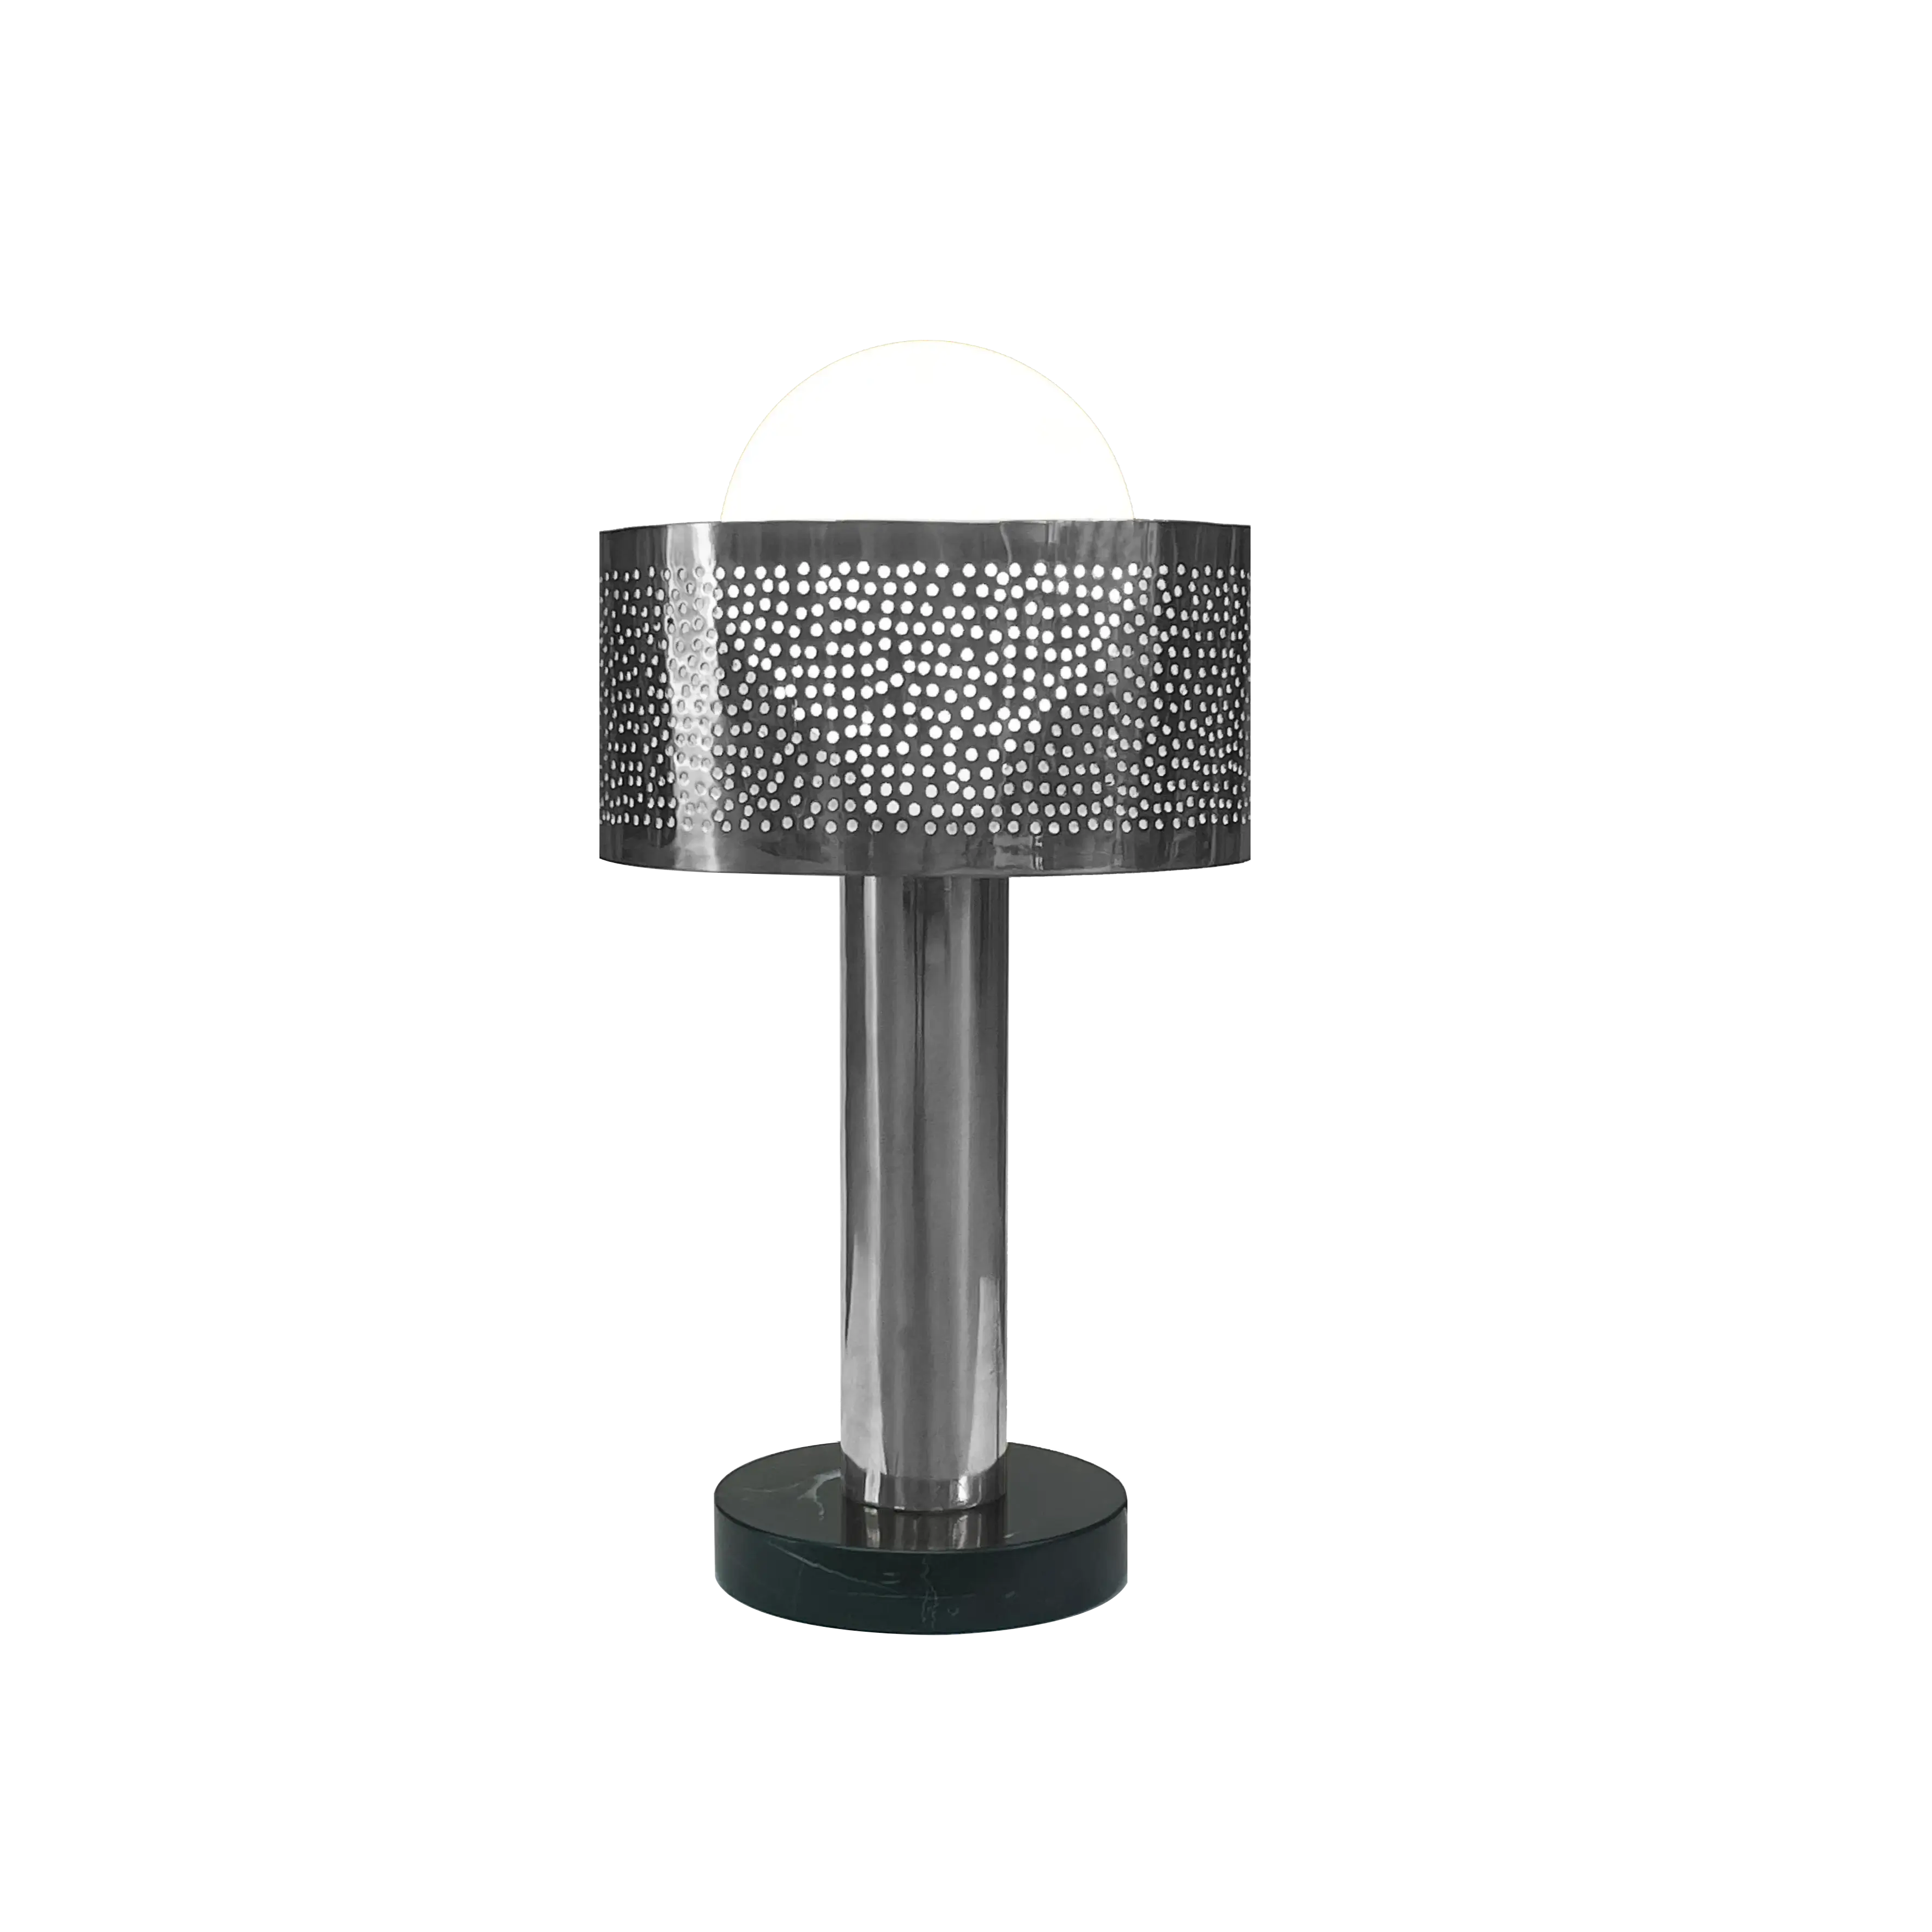 Dounia home Table lamp in nickel silver  made of Metal, Model: Alula